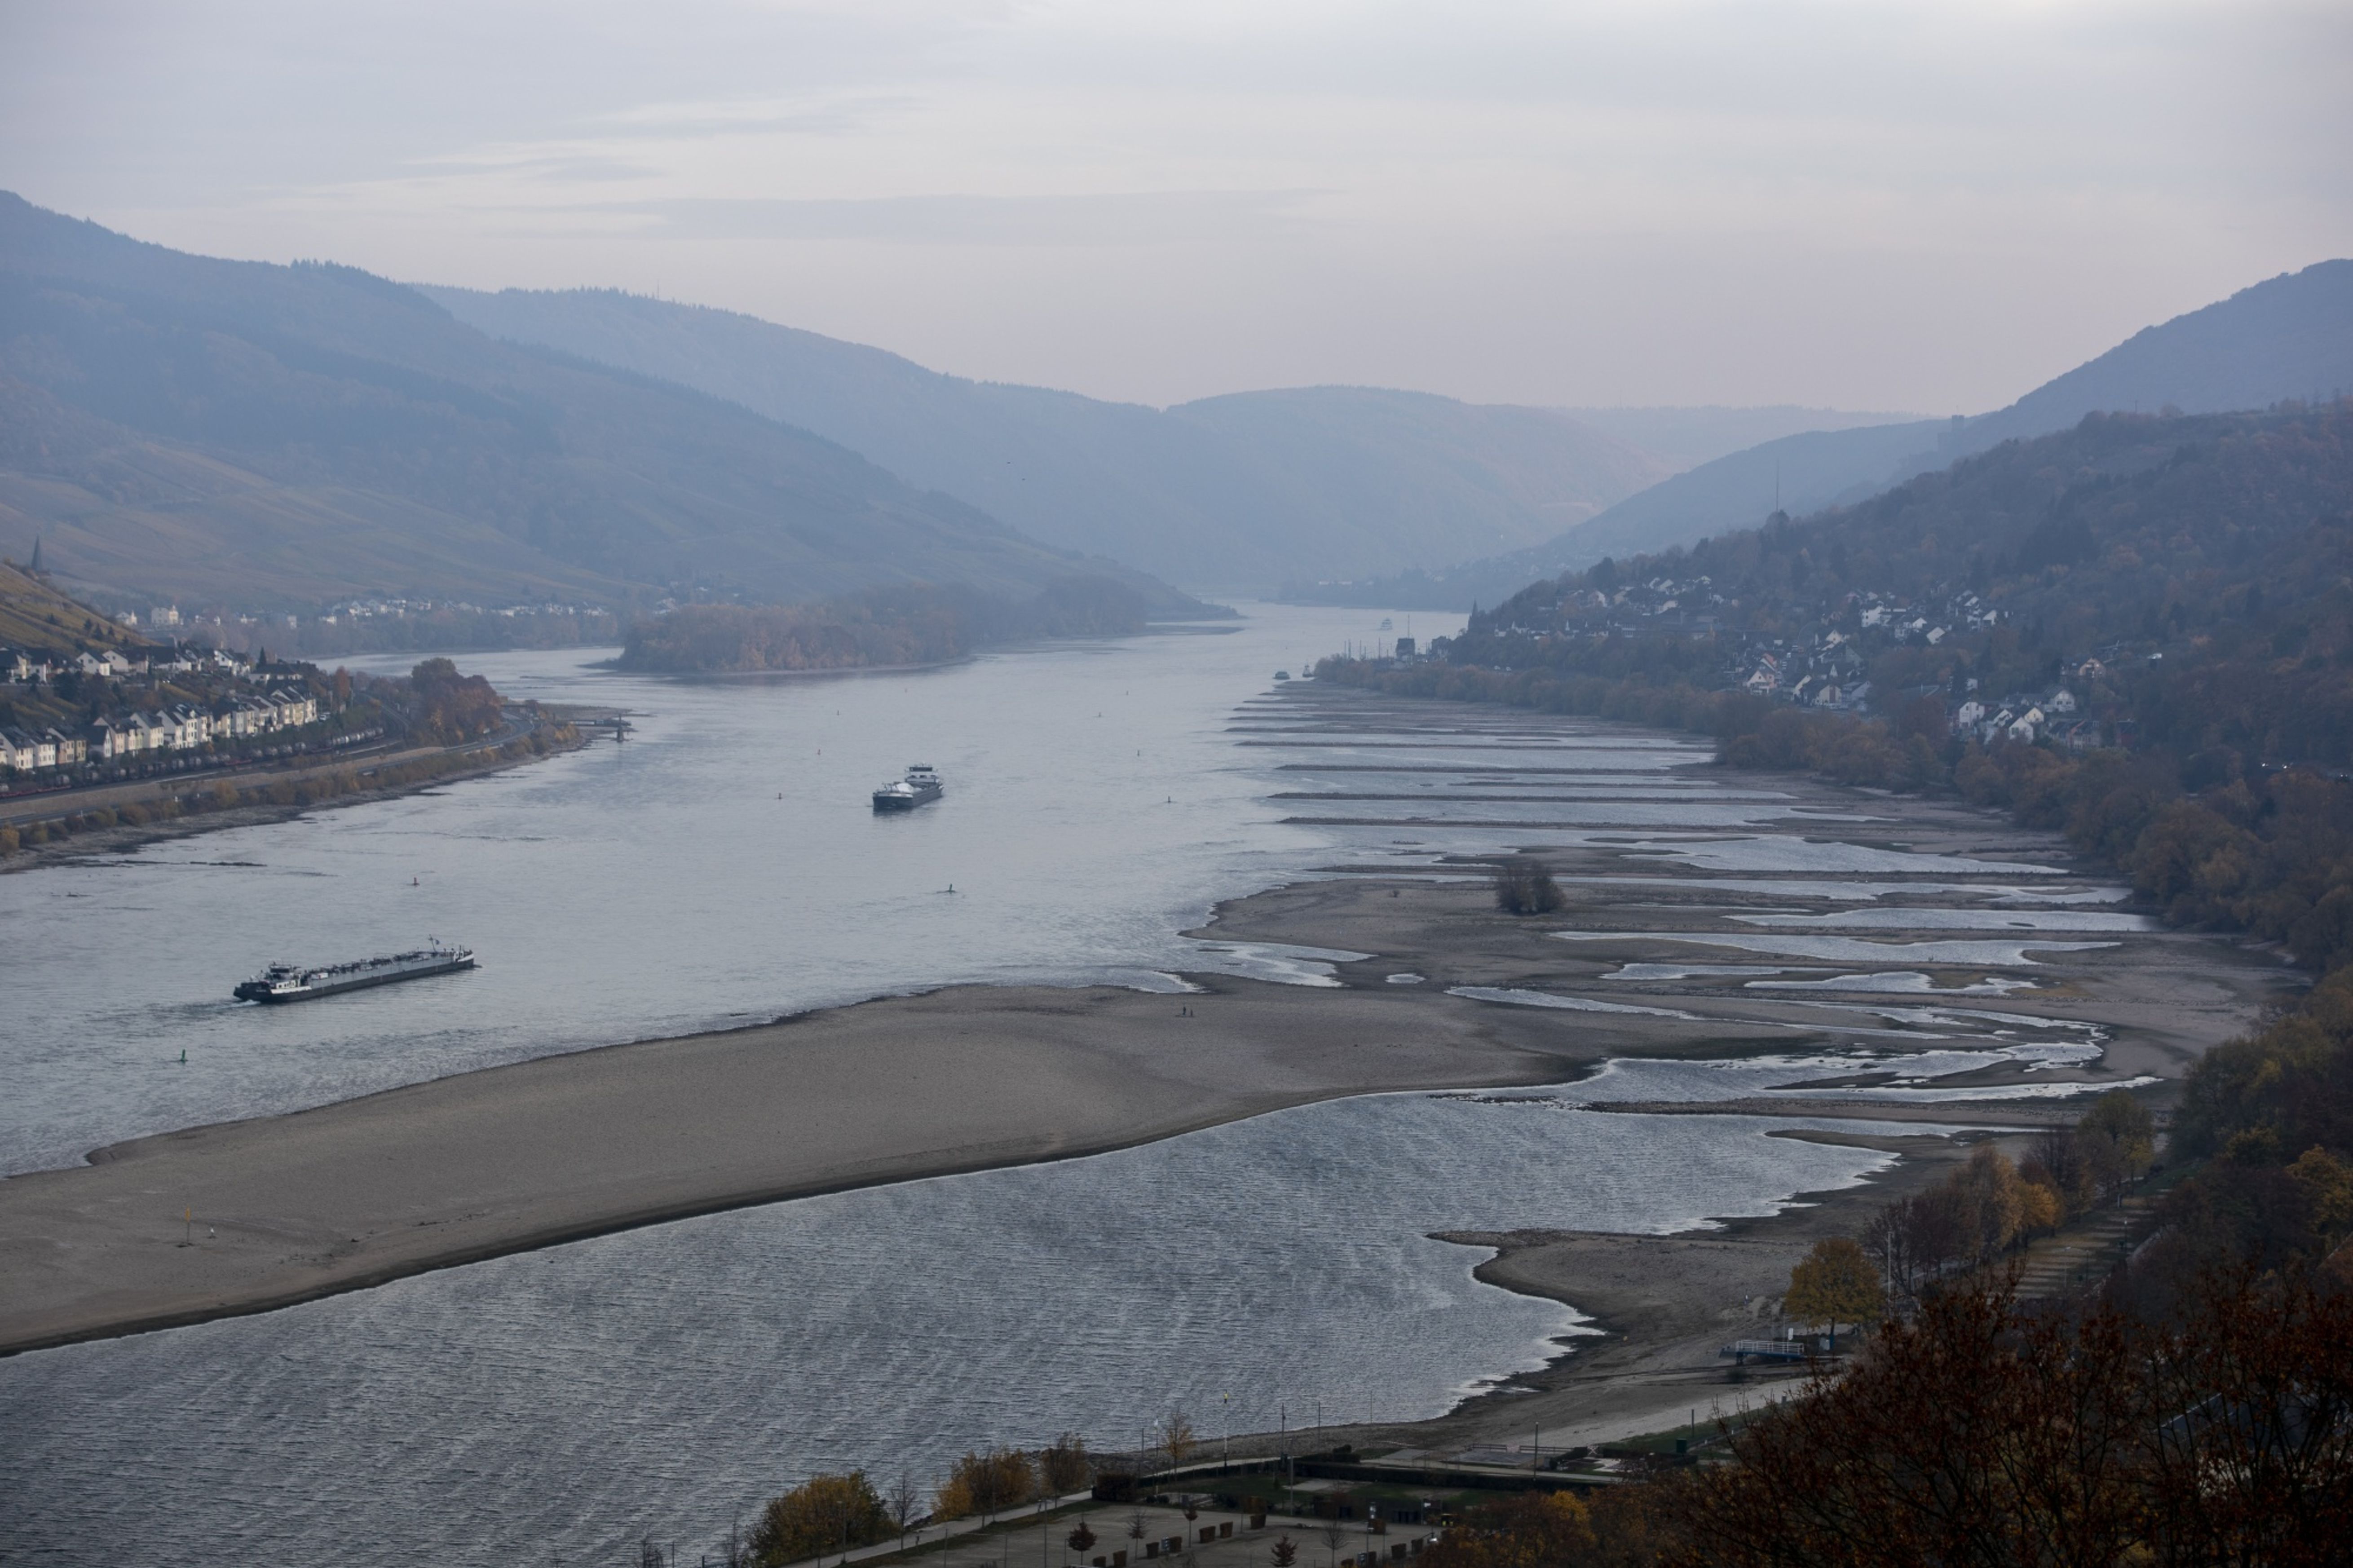 rhine river cruises and drought